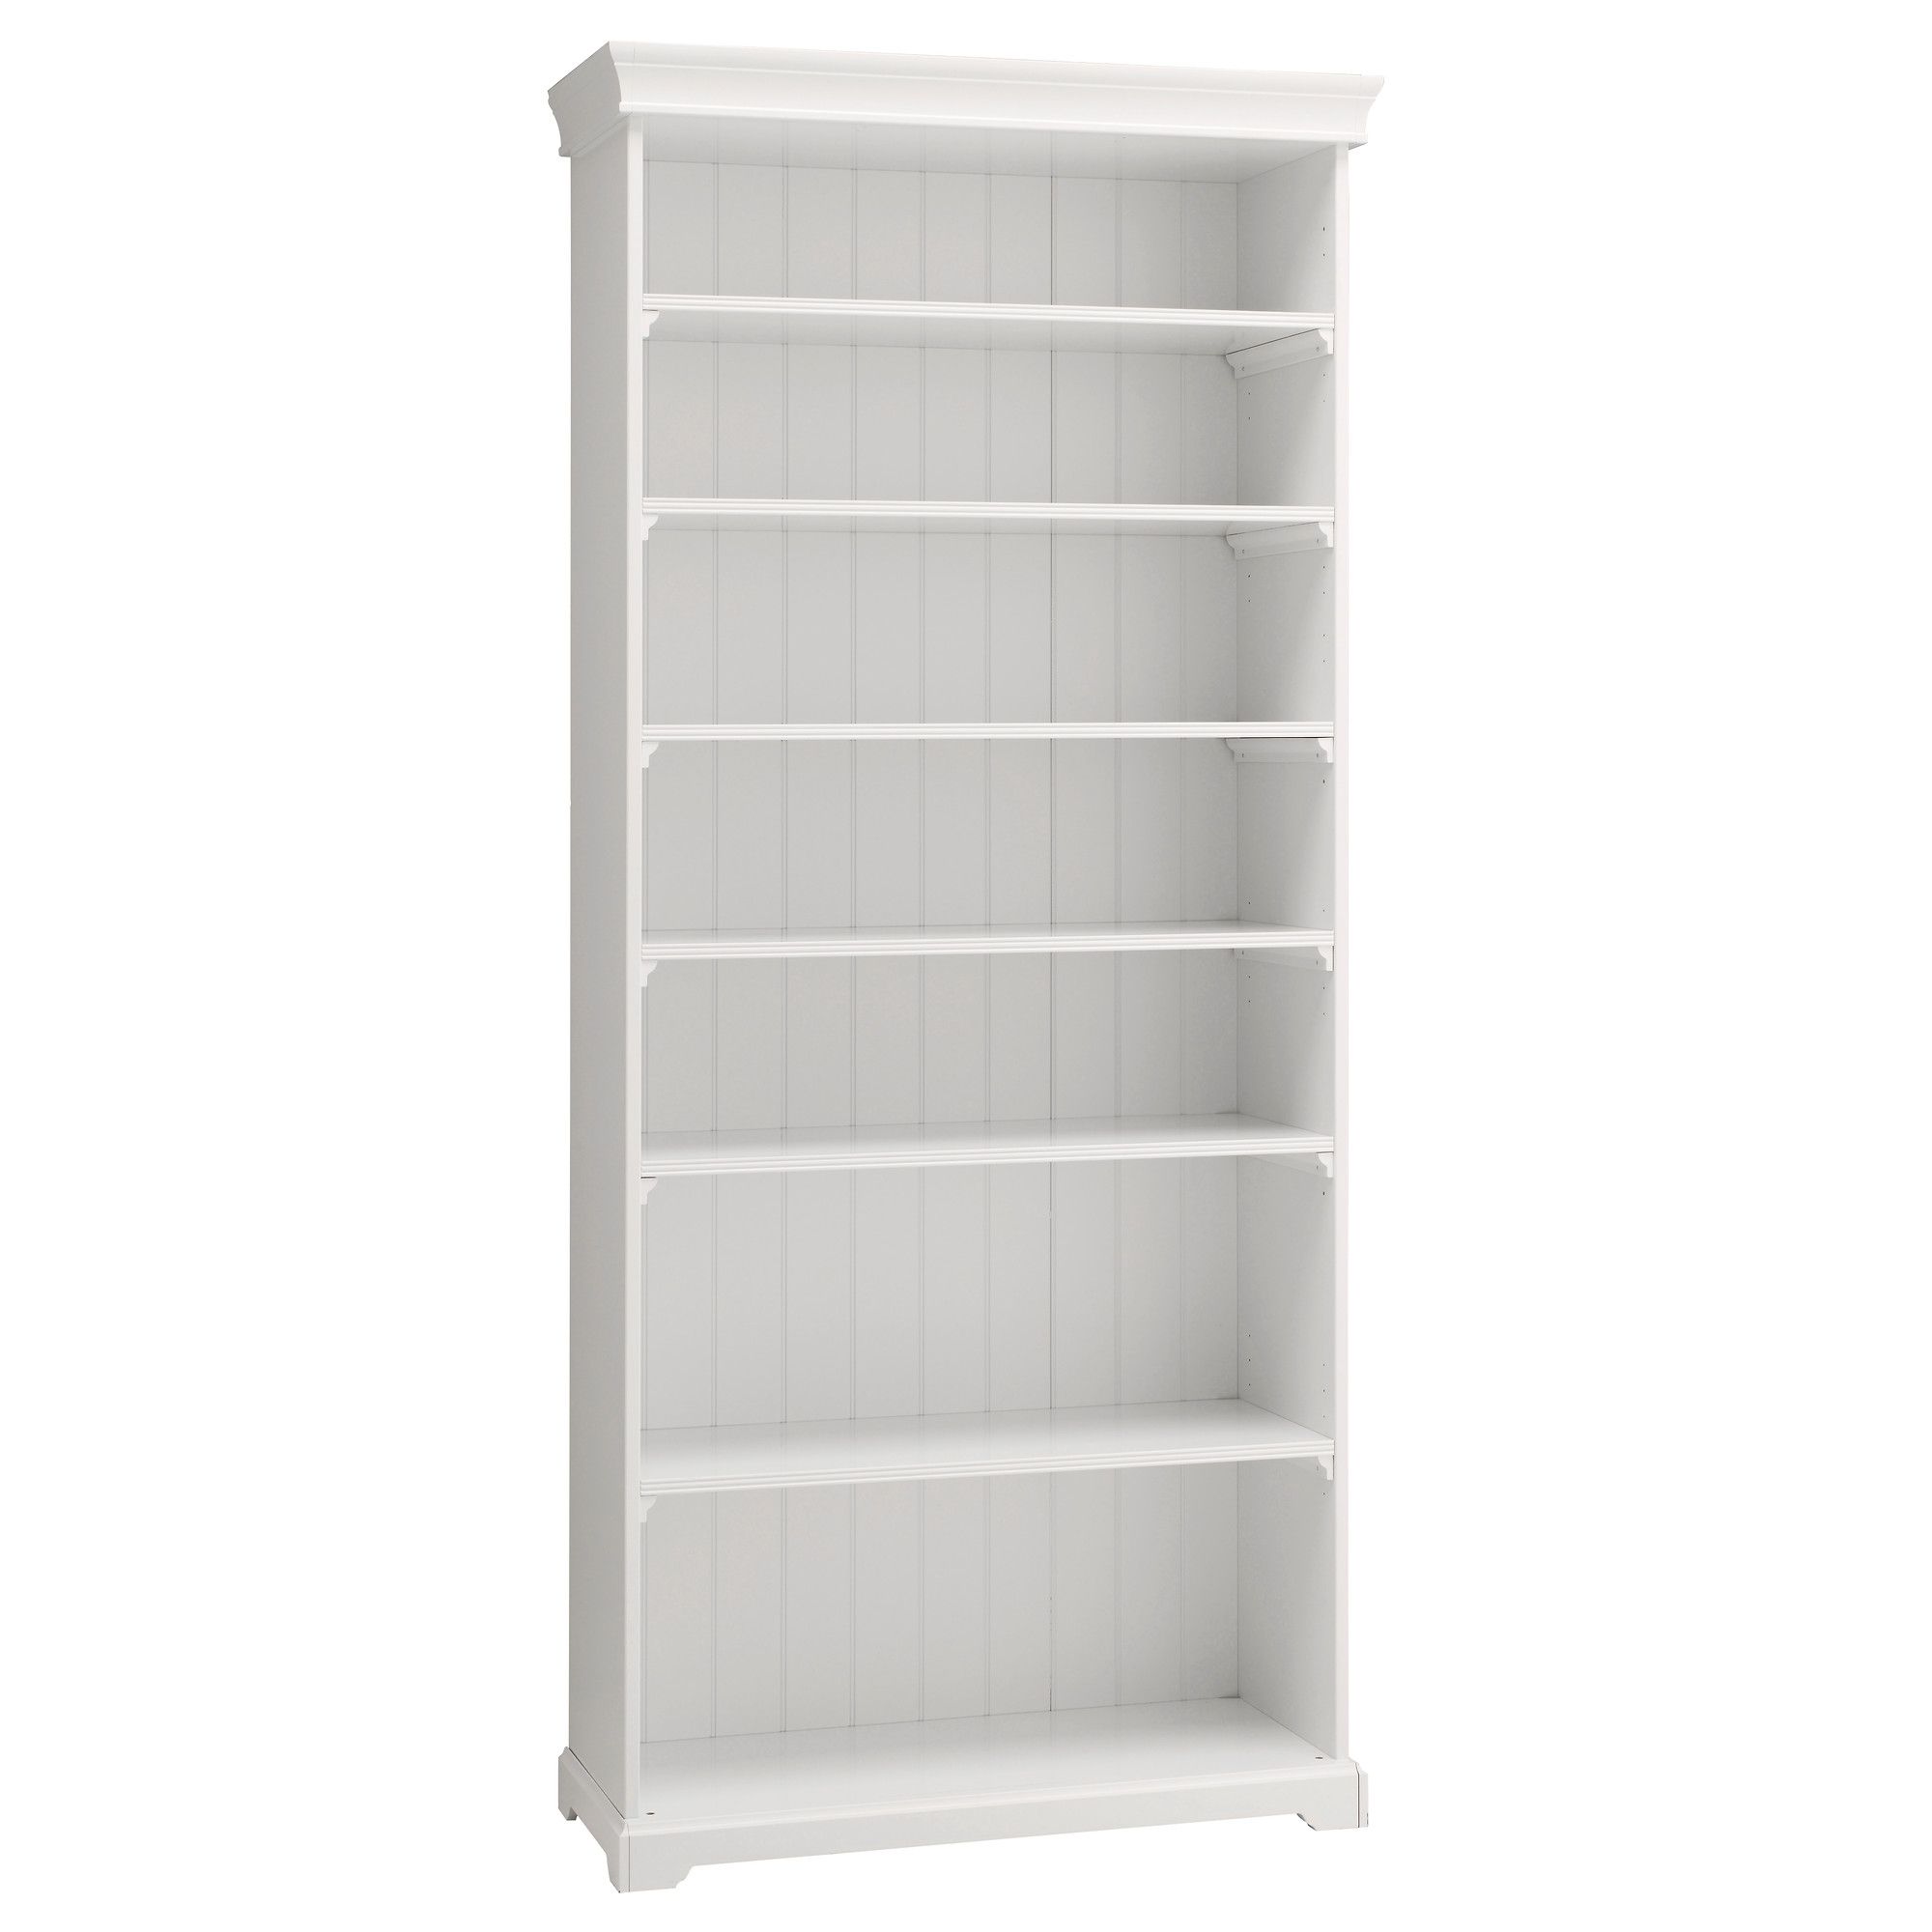 Thin Bookcases With Favorite Bookcases Modern Traditional Ikea Thin White Bookcase Slim (View 15 of 15)